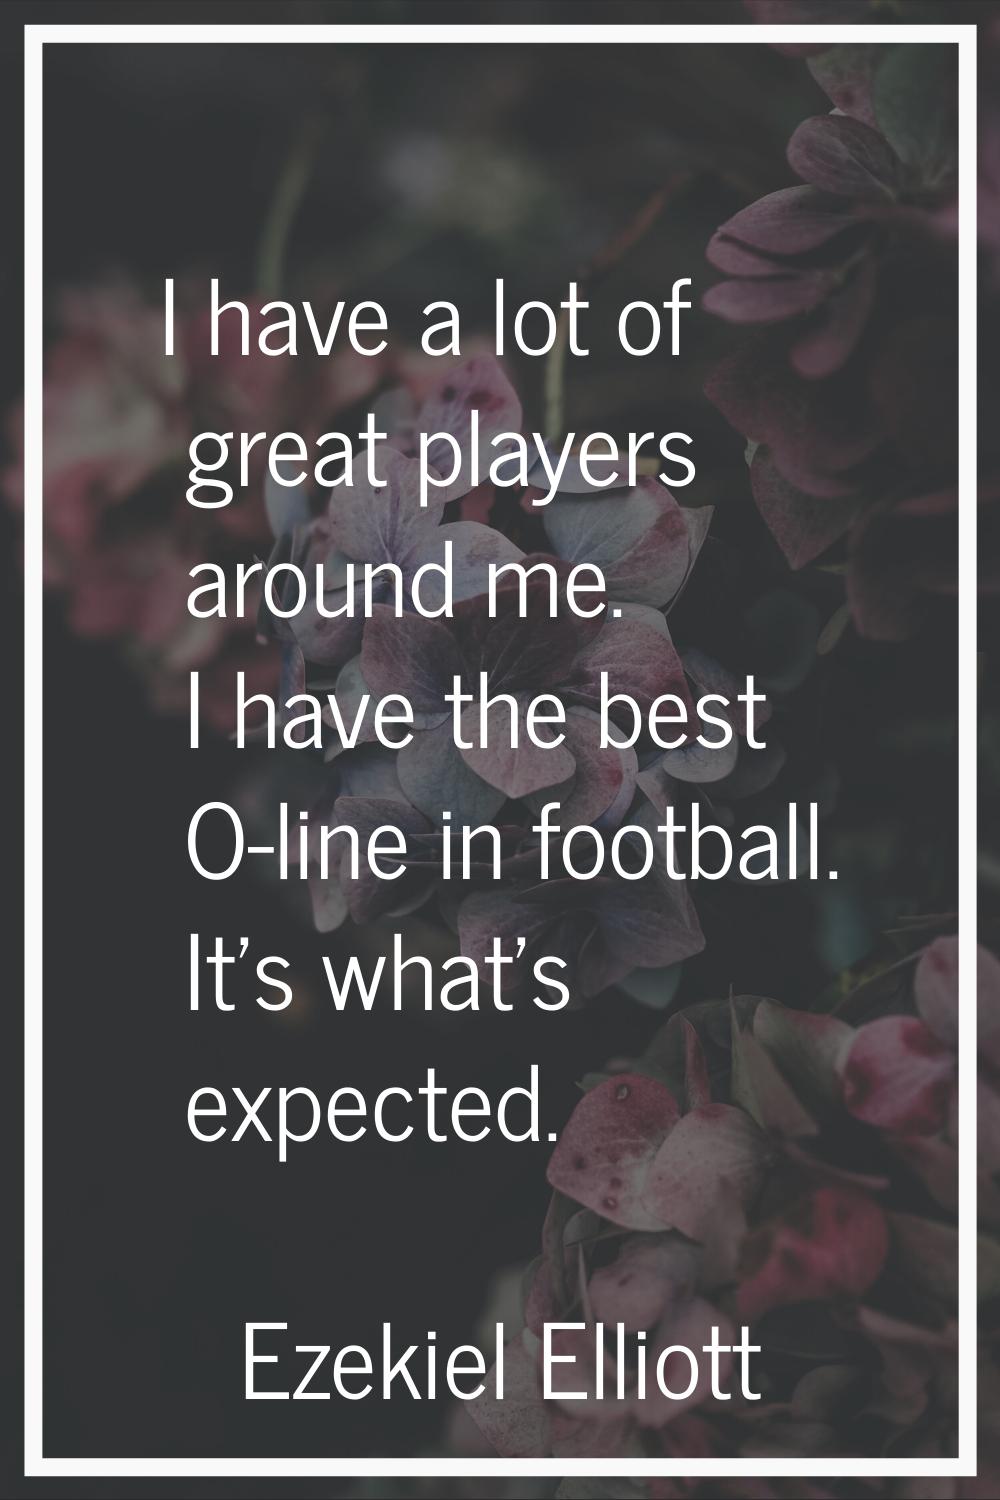 I have a lot of great players around me. I have the best O-line in football. It's what's expected.